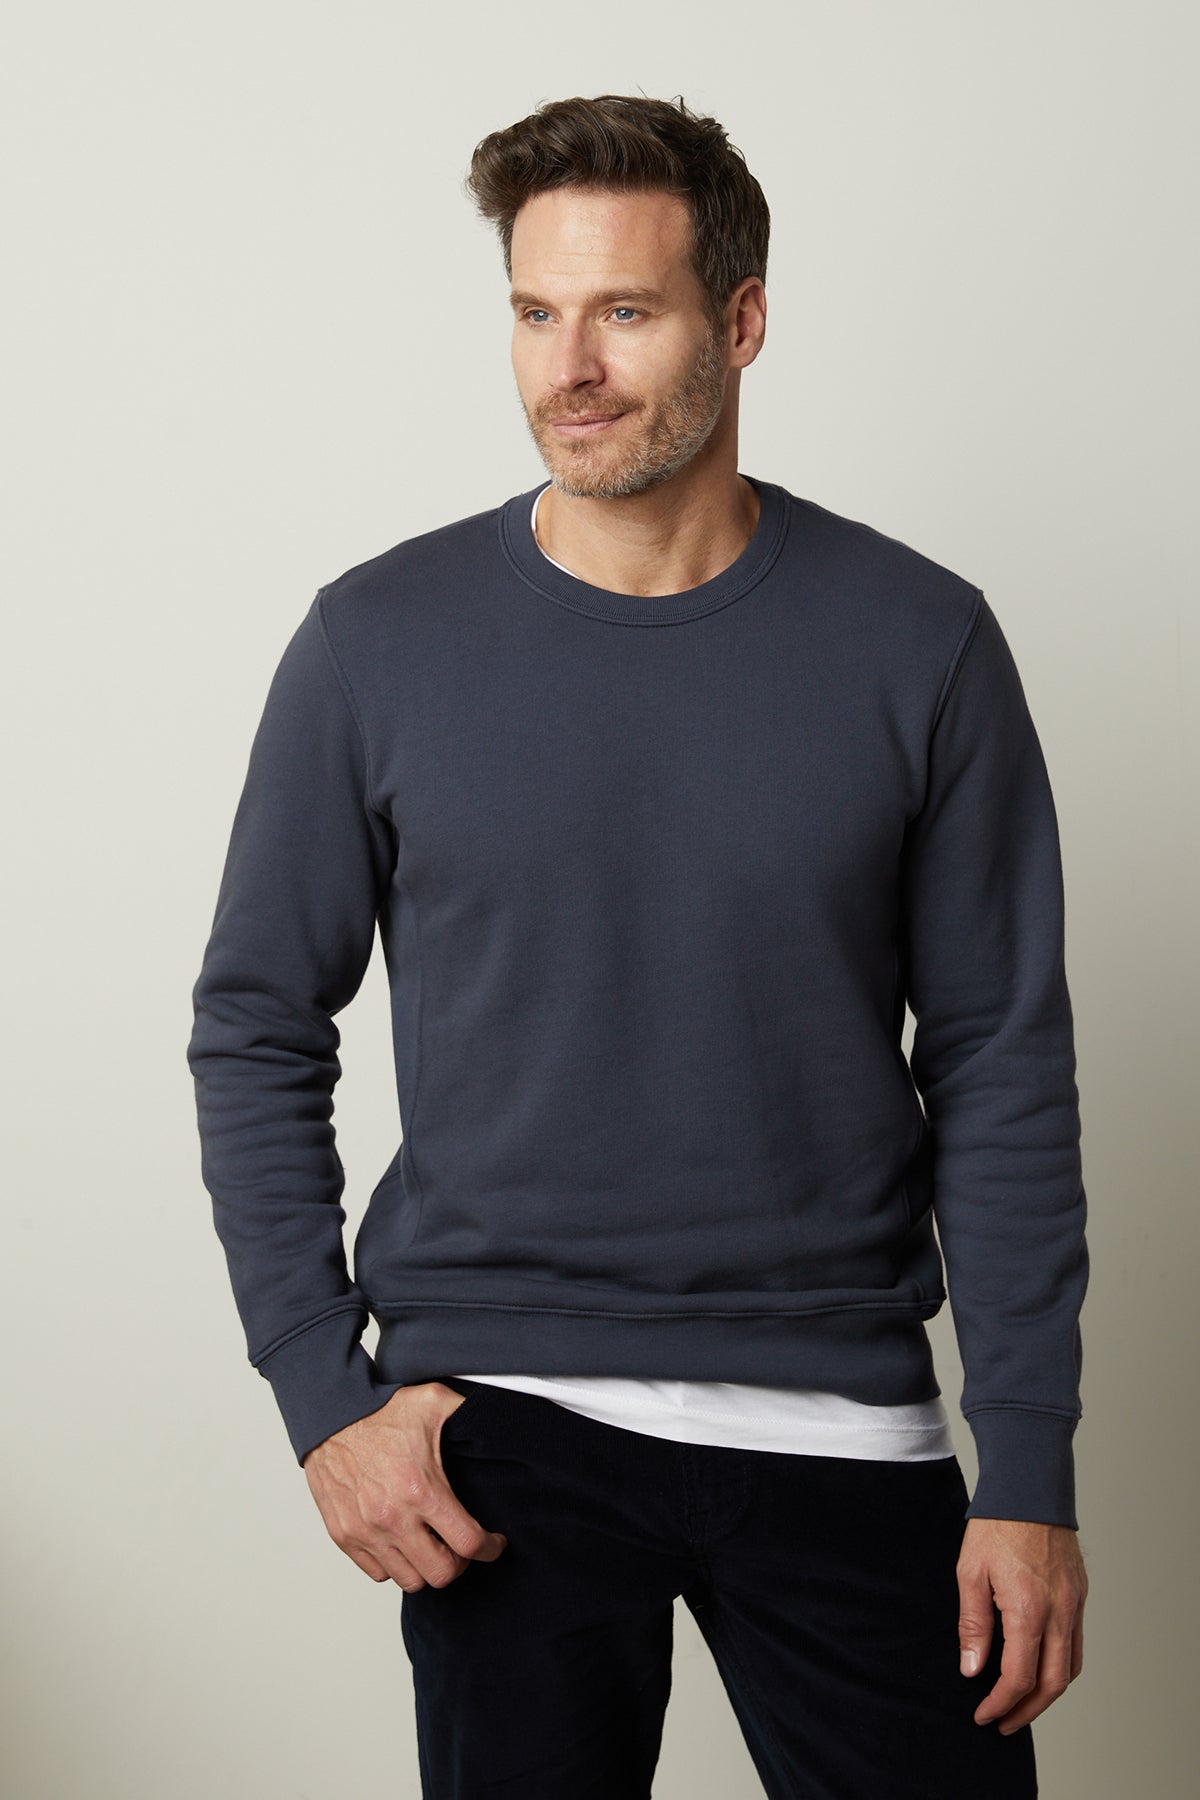 A man wearing a Velvet by Graham & Spencer KING CREW NECK SWEATSHIRT and black pants.-35472108060865